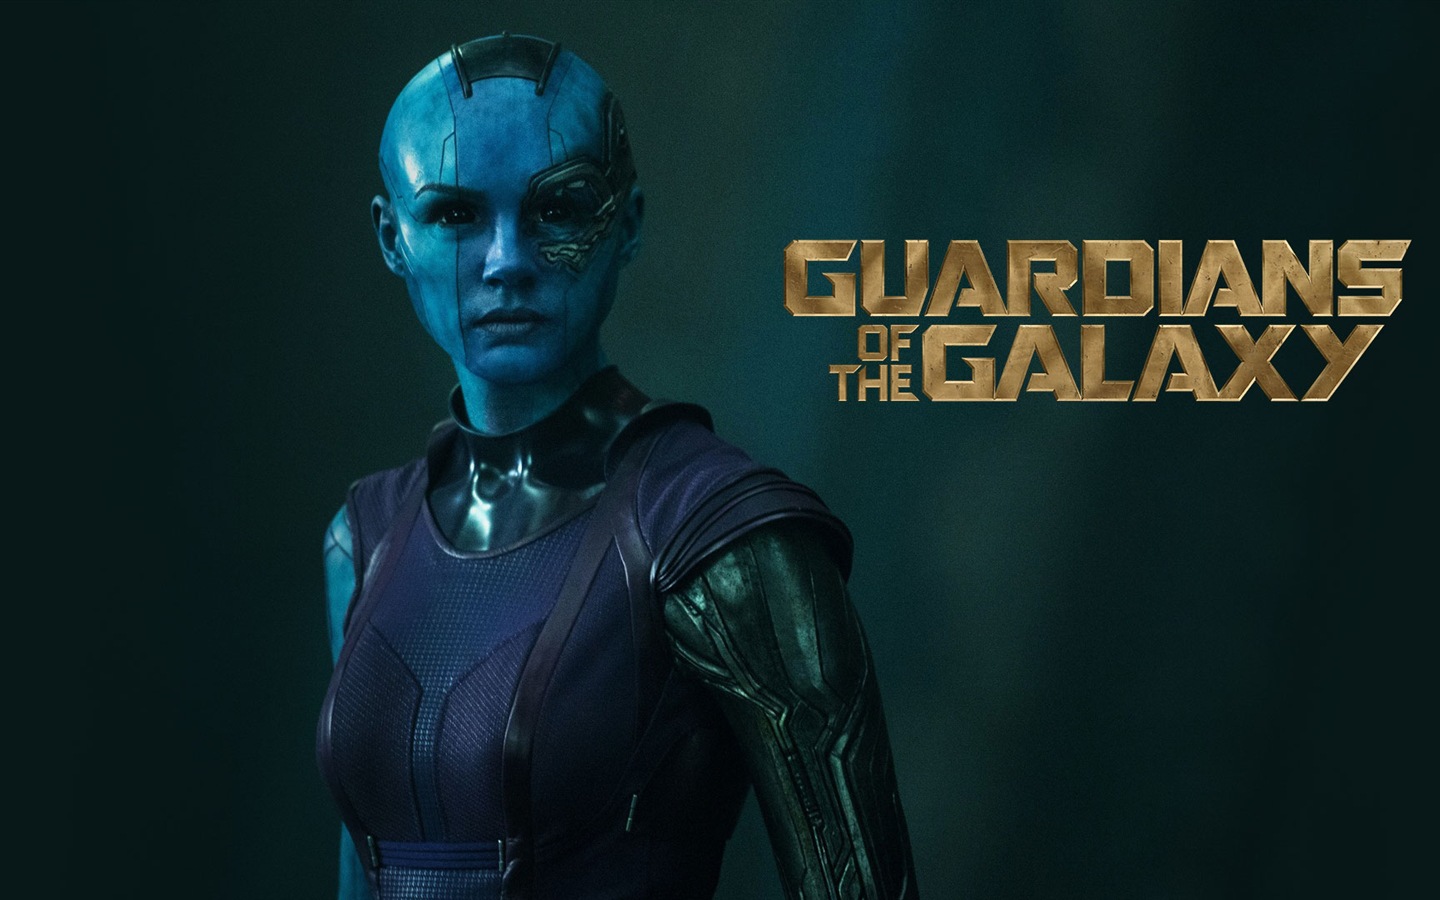 Guardians of the Galaxy 2014 HD movie wallpapers #10 - 1440x900